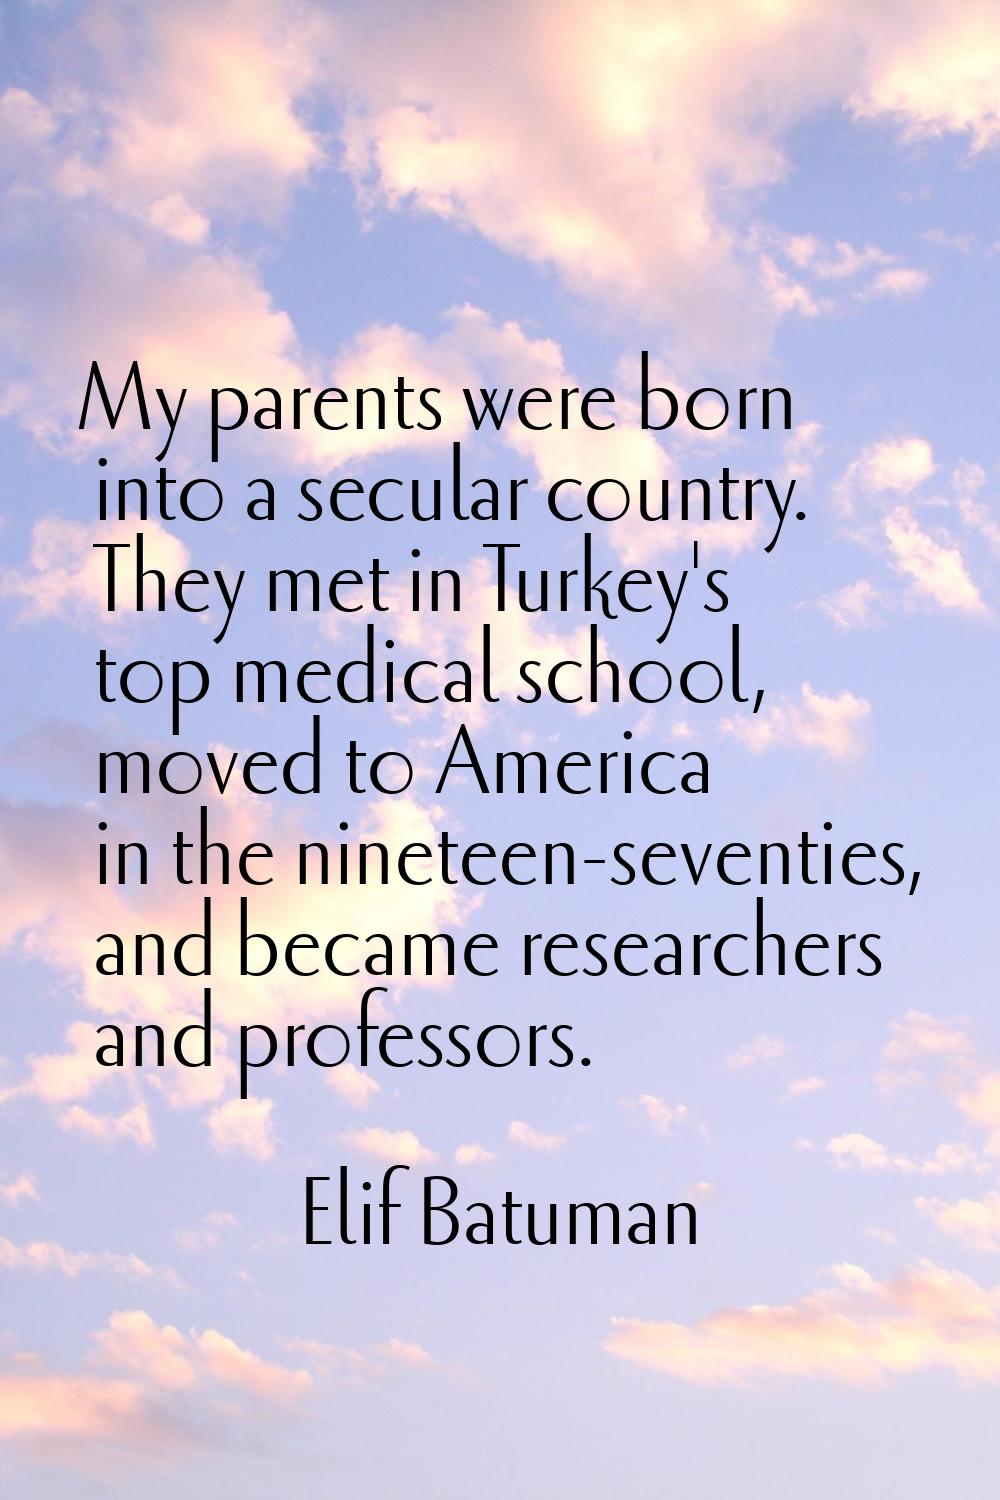 My parents were born into a secular country. They met in Turkey's top medical school, moved to Amer